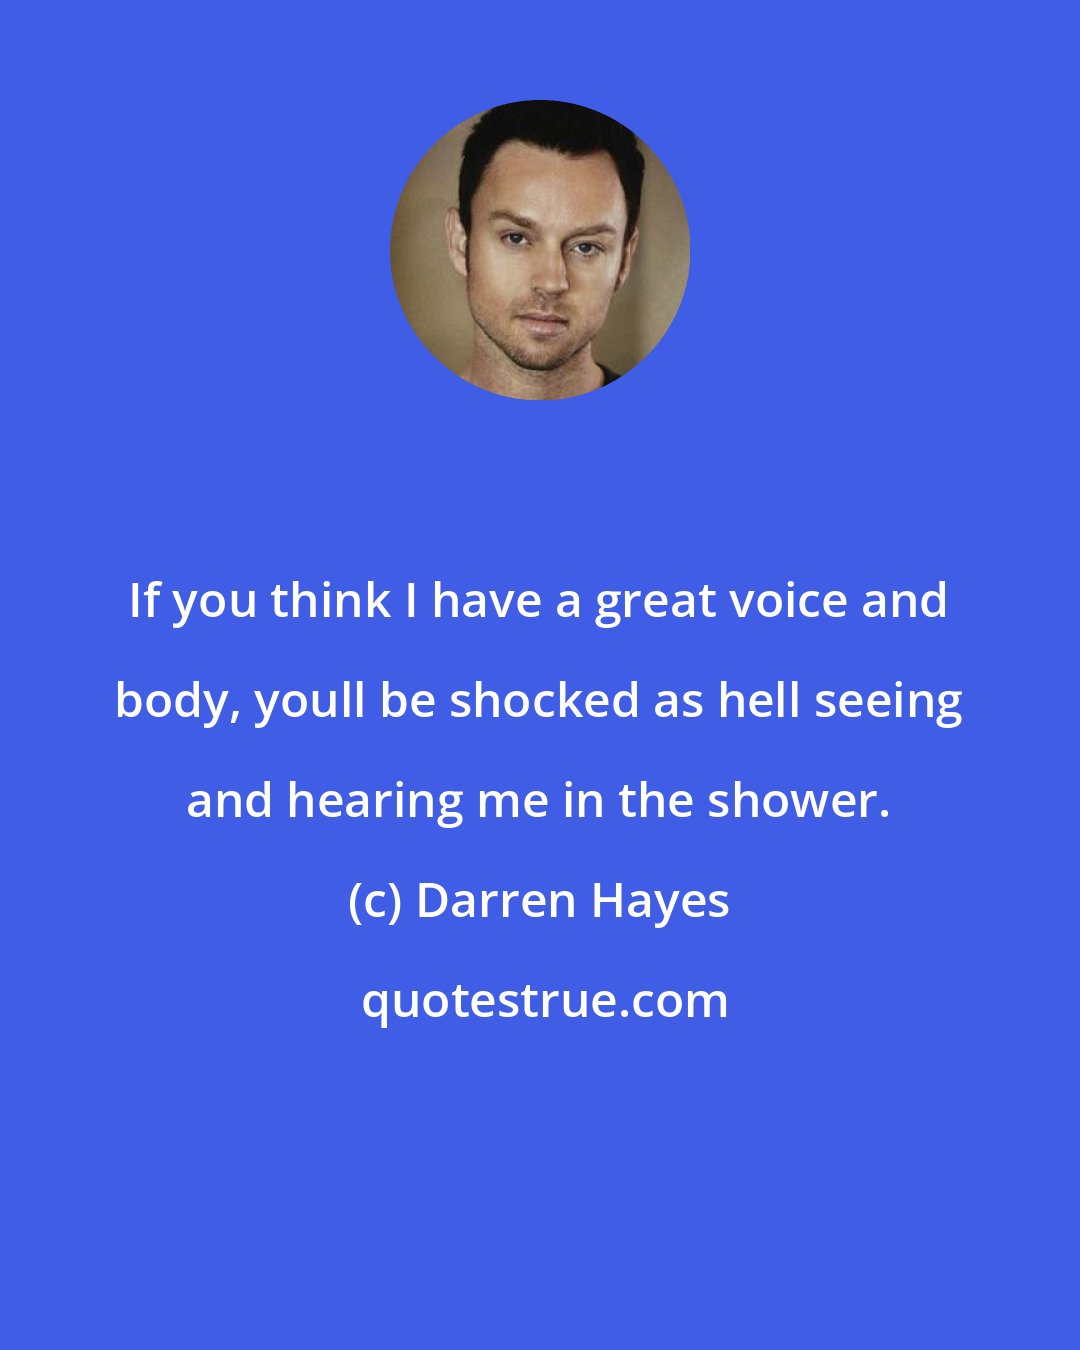 Darren Hayes: If you think I have a great voice and body, youll be shocked as hell seeing and hearing me in the shower.